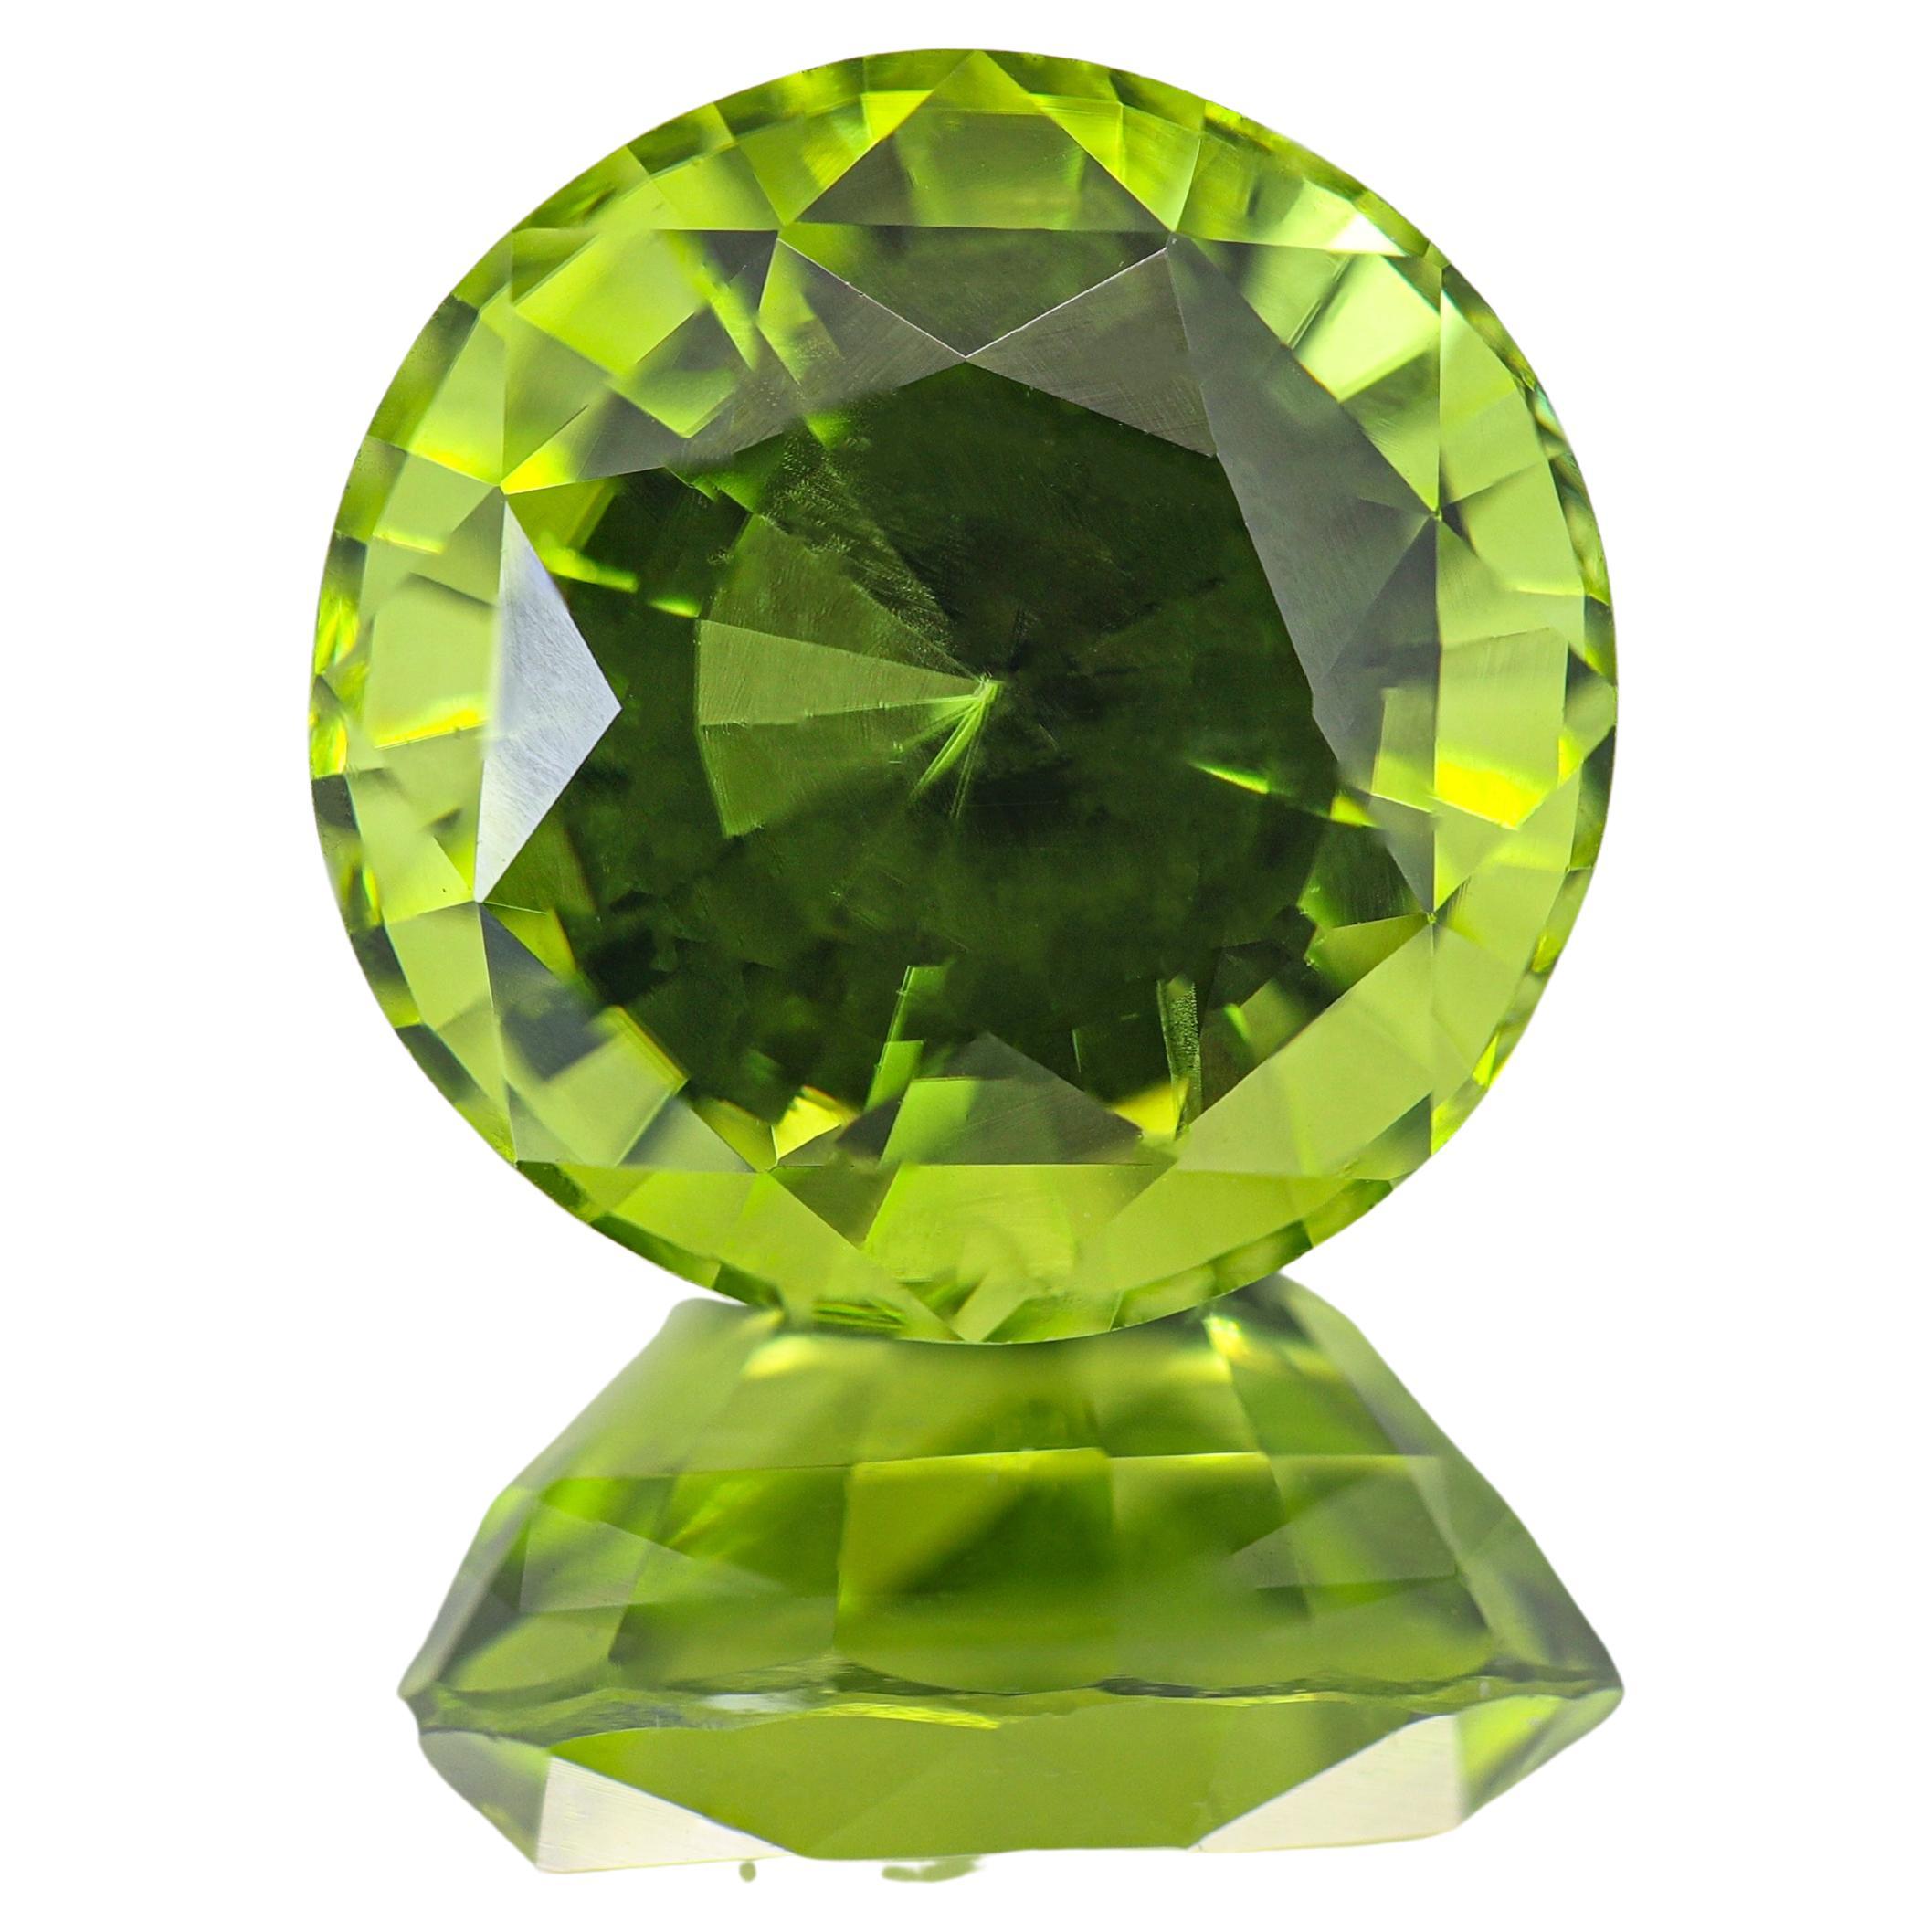 What is the spiritual meaning of Peridot?